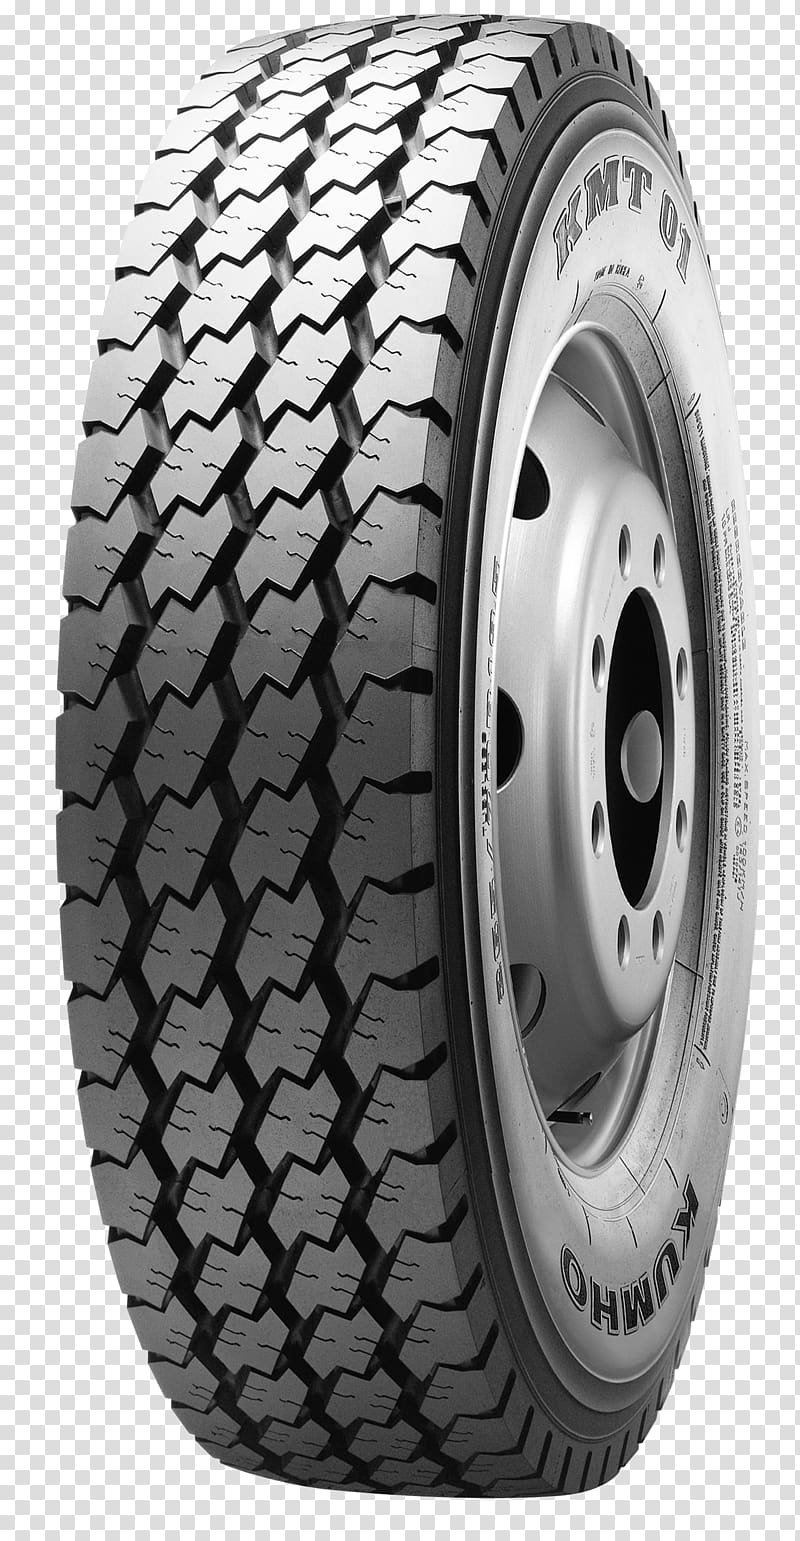 Tread Car Kumho Tire Tyre label, kumho tire transparent background PNG clipart